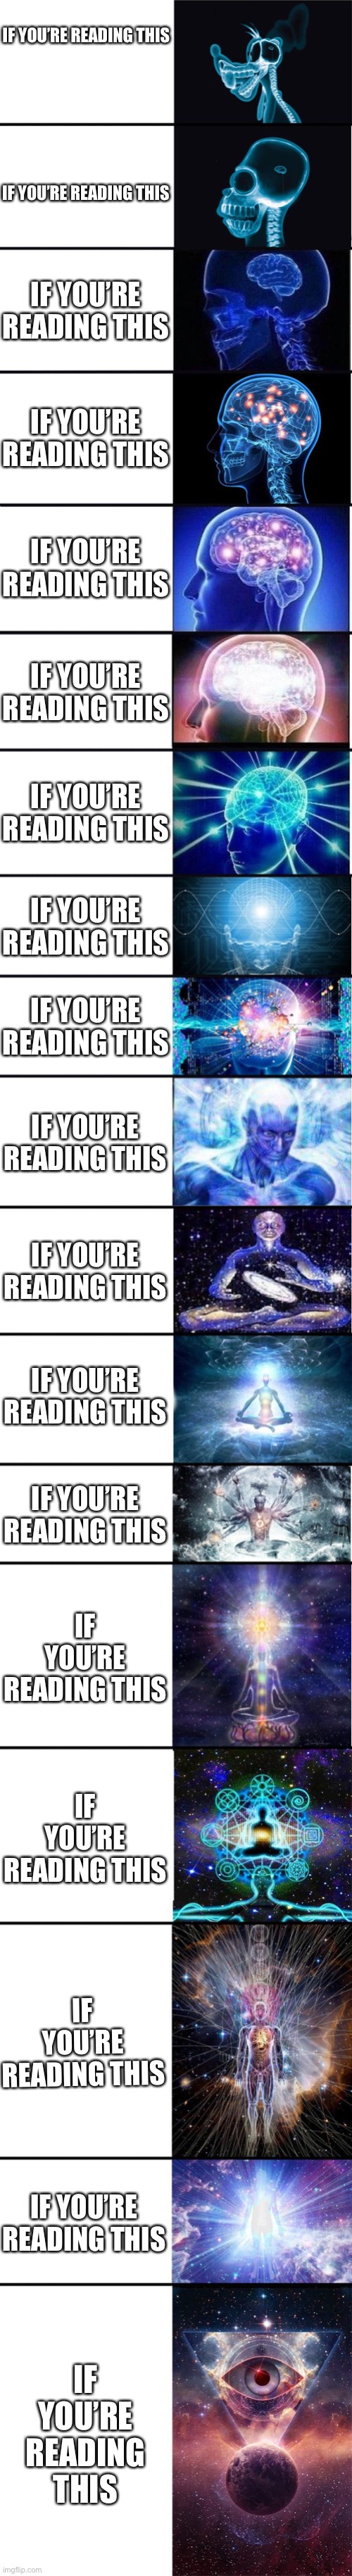 expanding brain: 9001 | IF YOU’RE READING THIS; IF YOU’RE READING THIS; IF YOU’RE READING THIS; IF YOU’RE READING THIS; IF YOU’RE READING THIS; IF YOU’RE READING THIS; IF YOU’RE READING THIS; IF YOU’RE READING THIS; IF YOU’RE READING THIS; IF YOU’RE READING THIS; IF YOU’RE READING THIS; IF YOU’RE READING THIS; IF YOU’RE READING THIS; IF YOU’RE READING THIS; IF YOU’RE READING THIS; IF YOU’RE READING THIS; IF YOU’RE READING THIS; IF YOU’RE READING THIS | image tagged in expanding brain 9001 | made w/ Imgflip meme maker